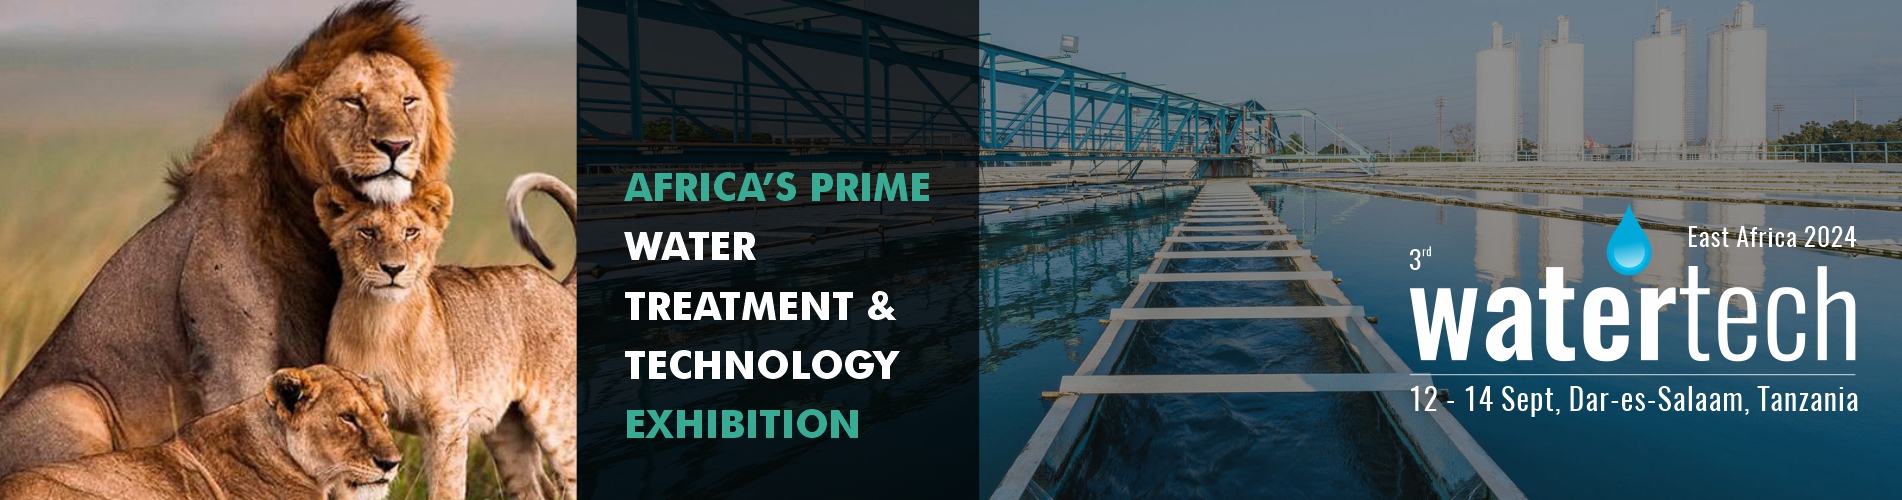 Watertech Tanzania 2024 - International WATER, WASTEWATER AND RELATED TECHNOLOGY Show Africa